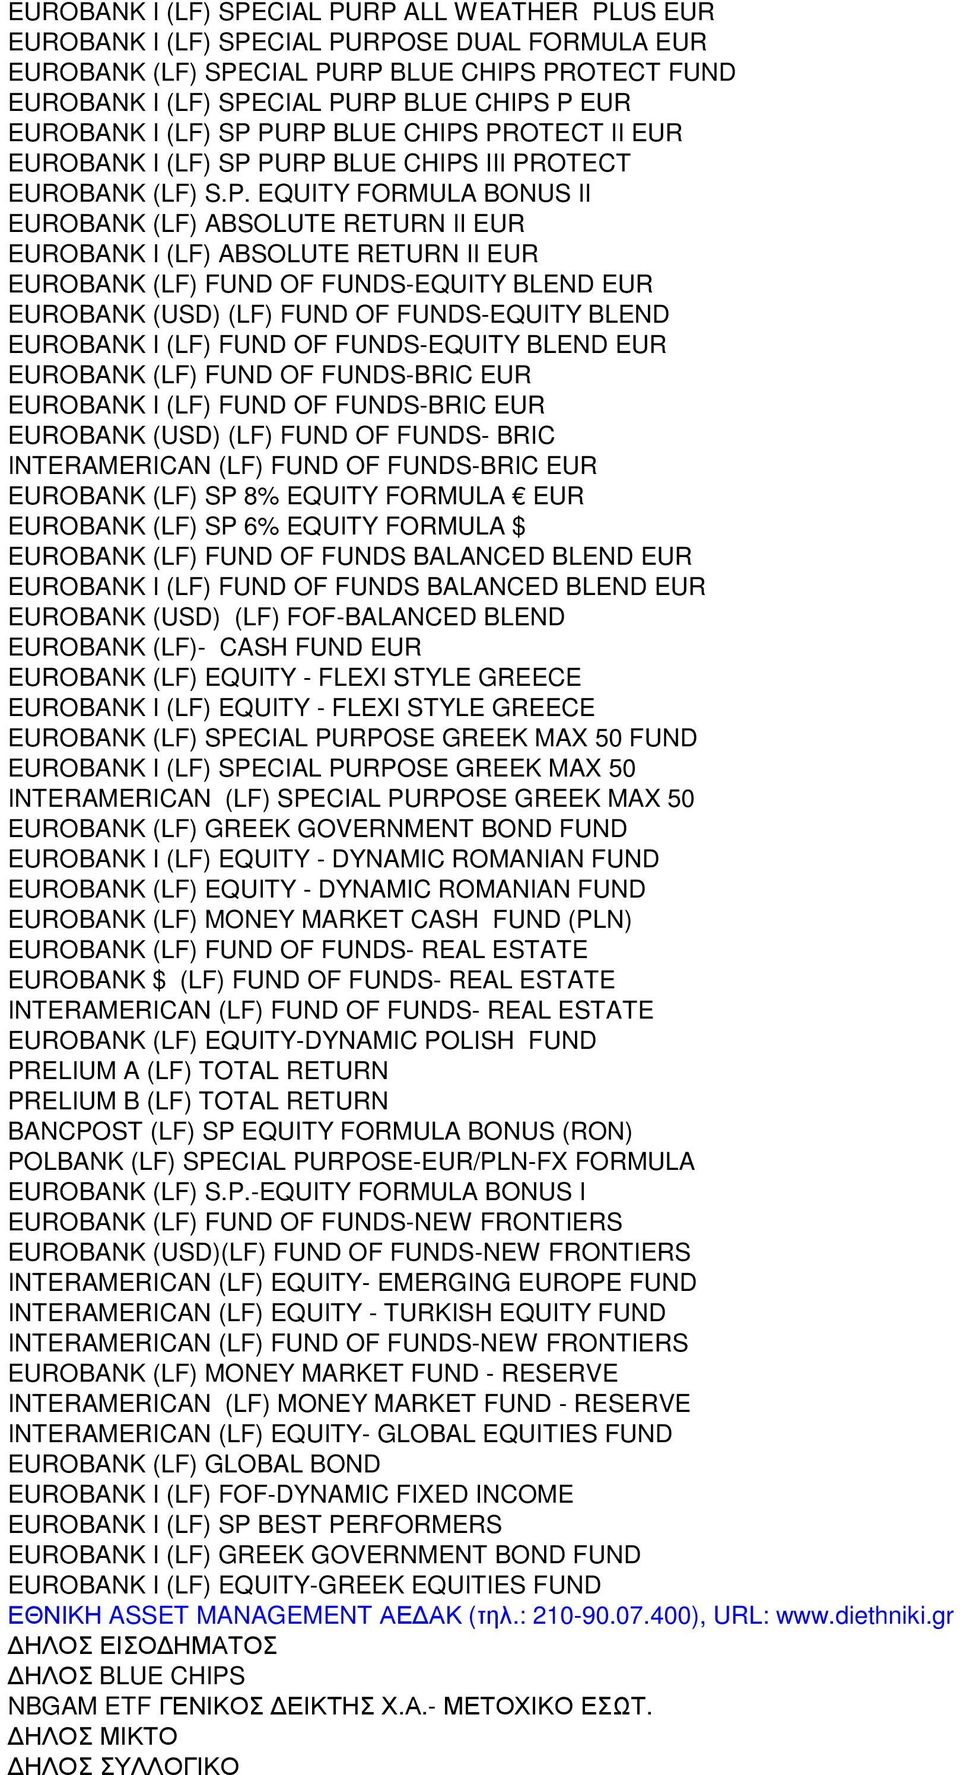 PURP BLUE CHIPS PROTECT II EUR PURP BLUE CHIPS III PROTECT EUROBANK (LF) S.P. EQUITY FORMULA BONUS II EUROBANK (LF) ABSOLUTE RETURN II EUR EUROBANK I (LF) ABSOLUTE RETURN II EUR EUROBANK (LF) FUND OF